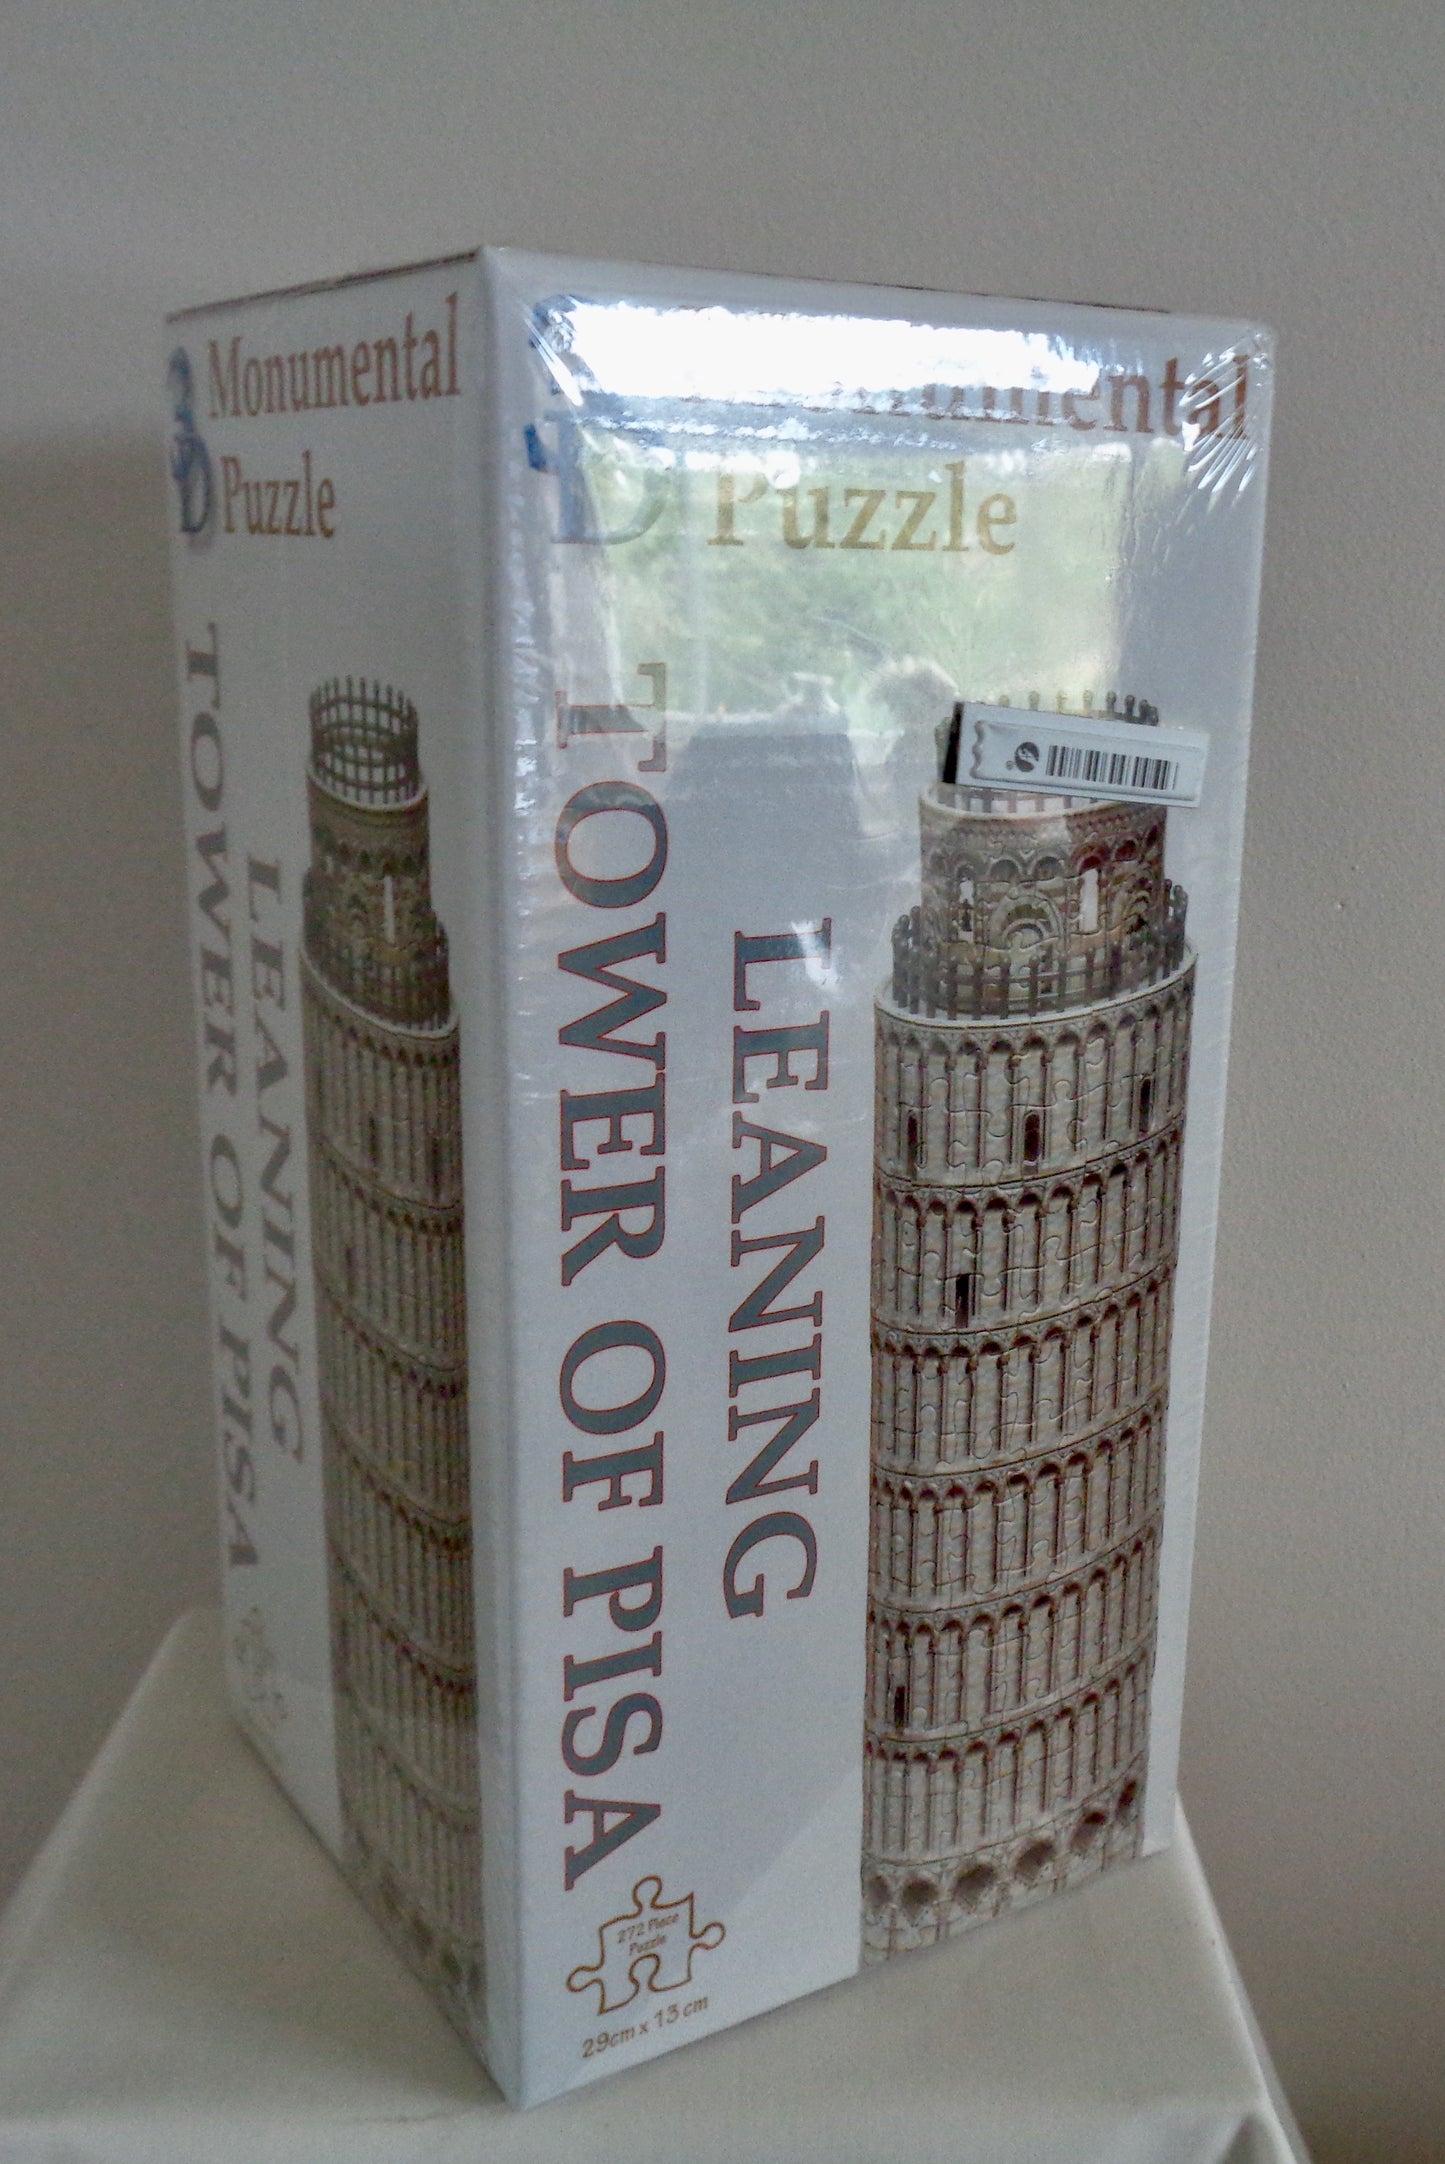 Leaning Tower of Pisa 3D Jigsaw